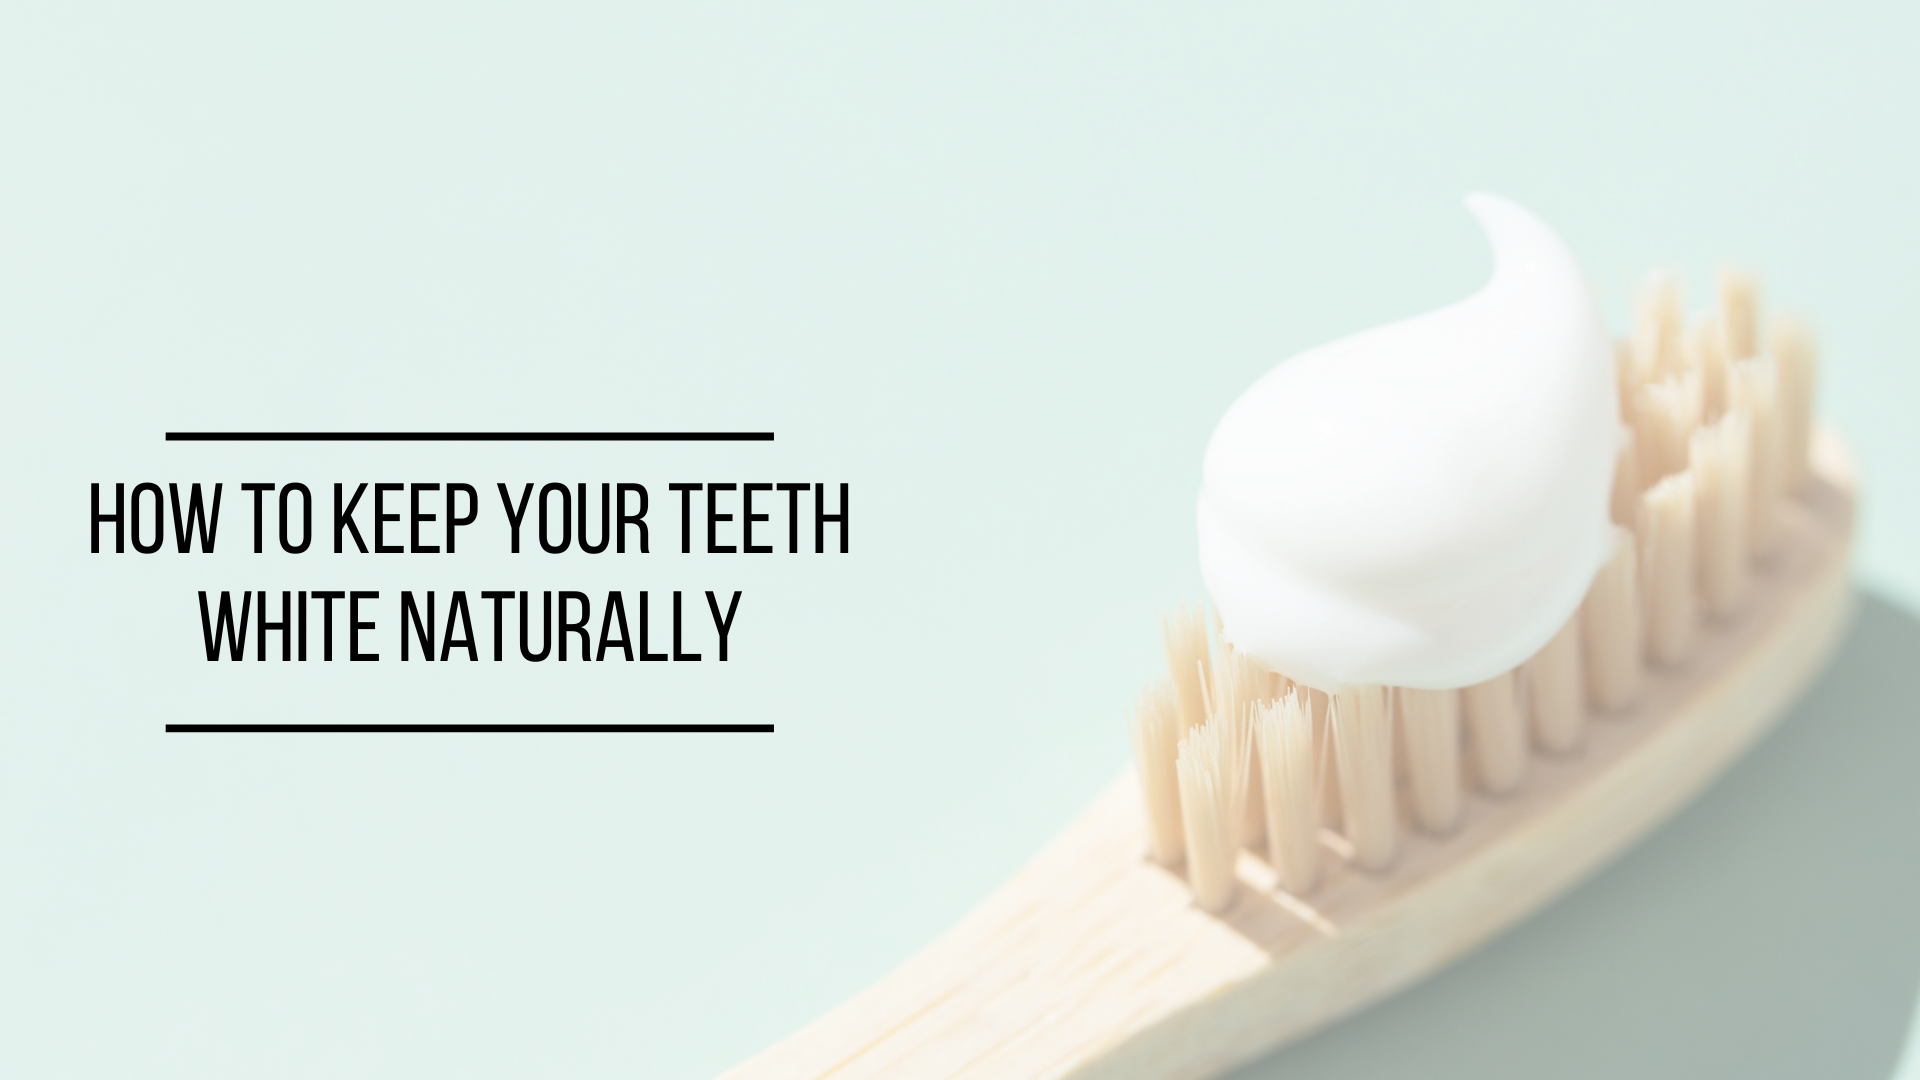 How to Keep Your Teeth White Naturally